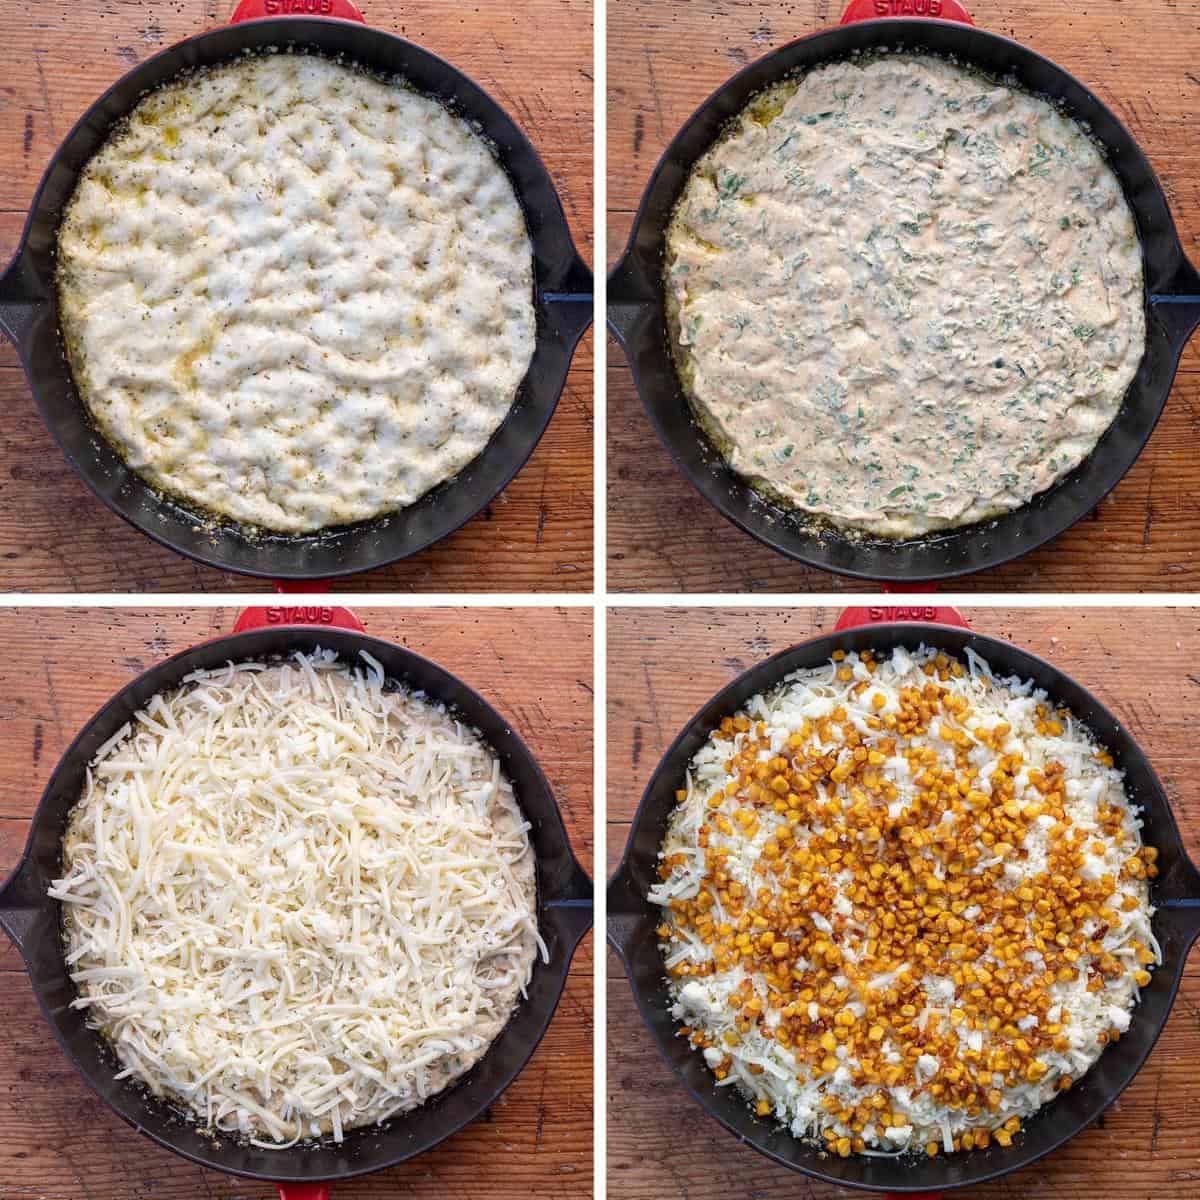 Steps of adding ingredients to Esquites pizza